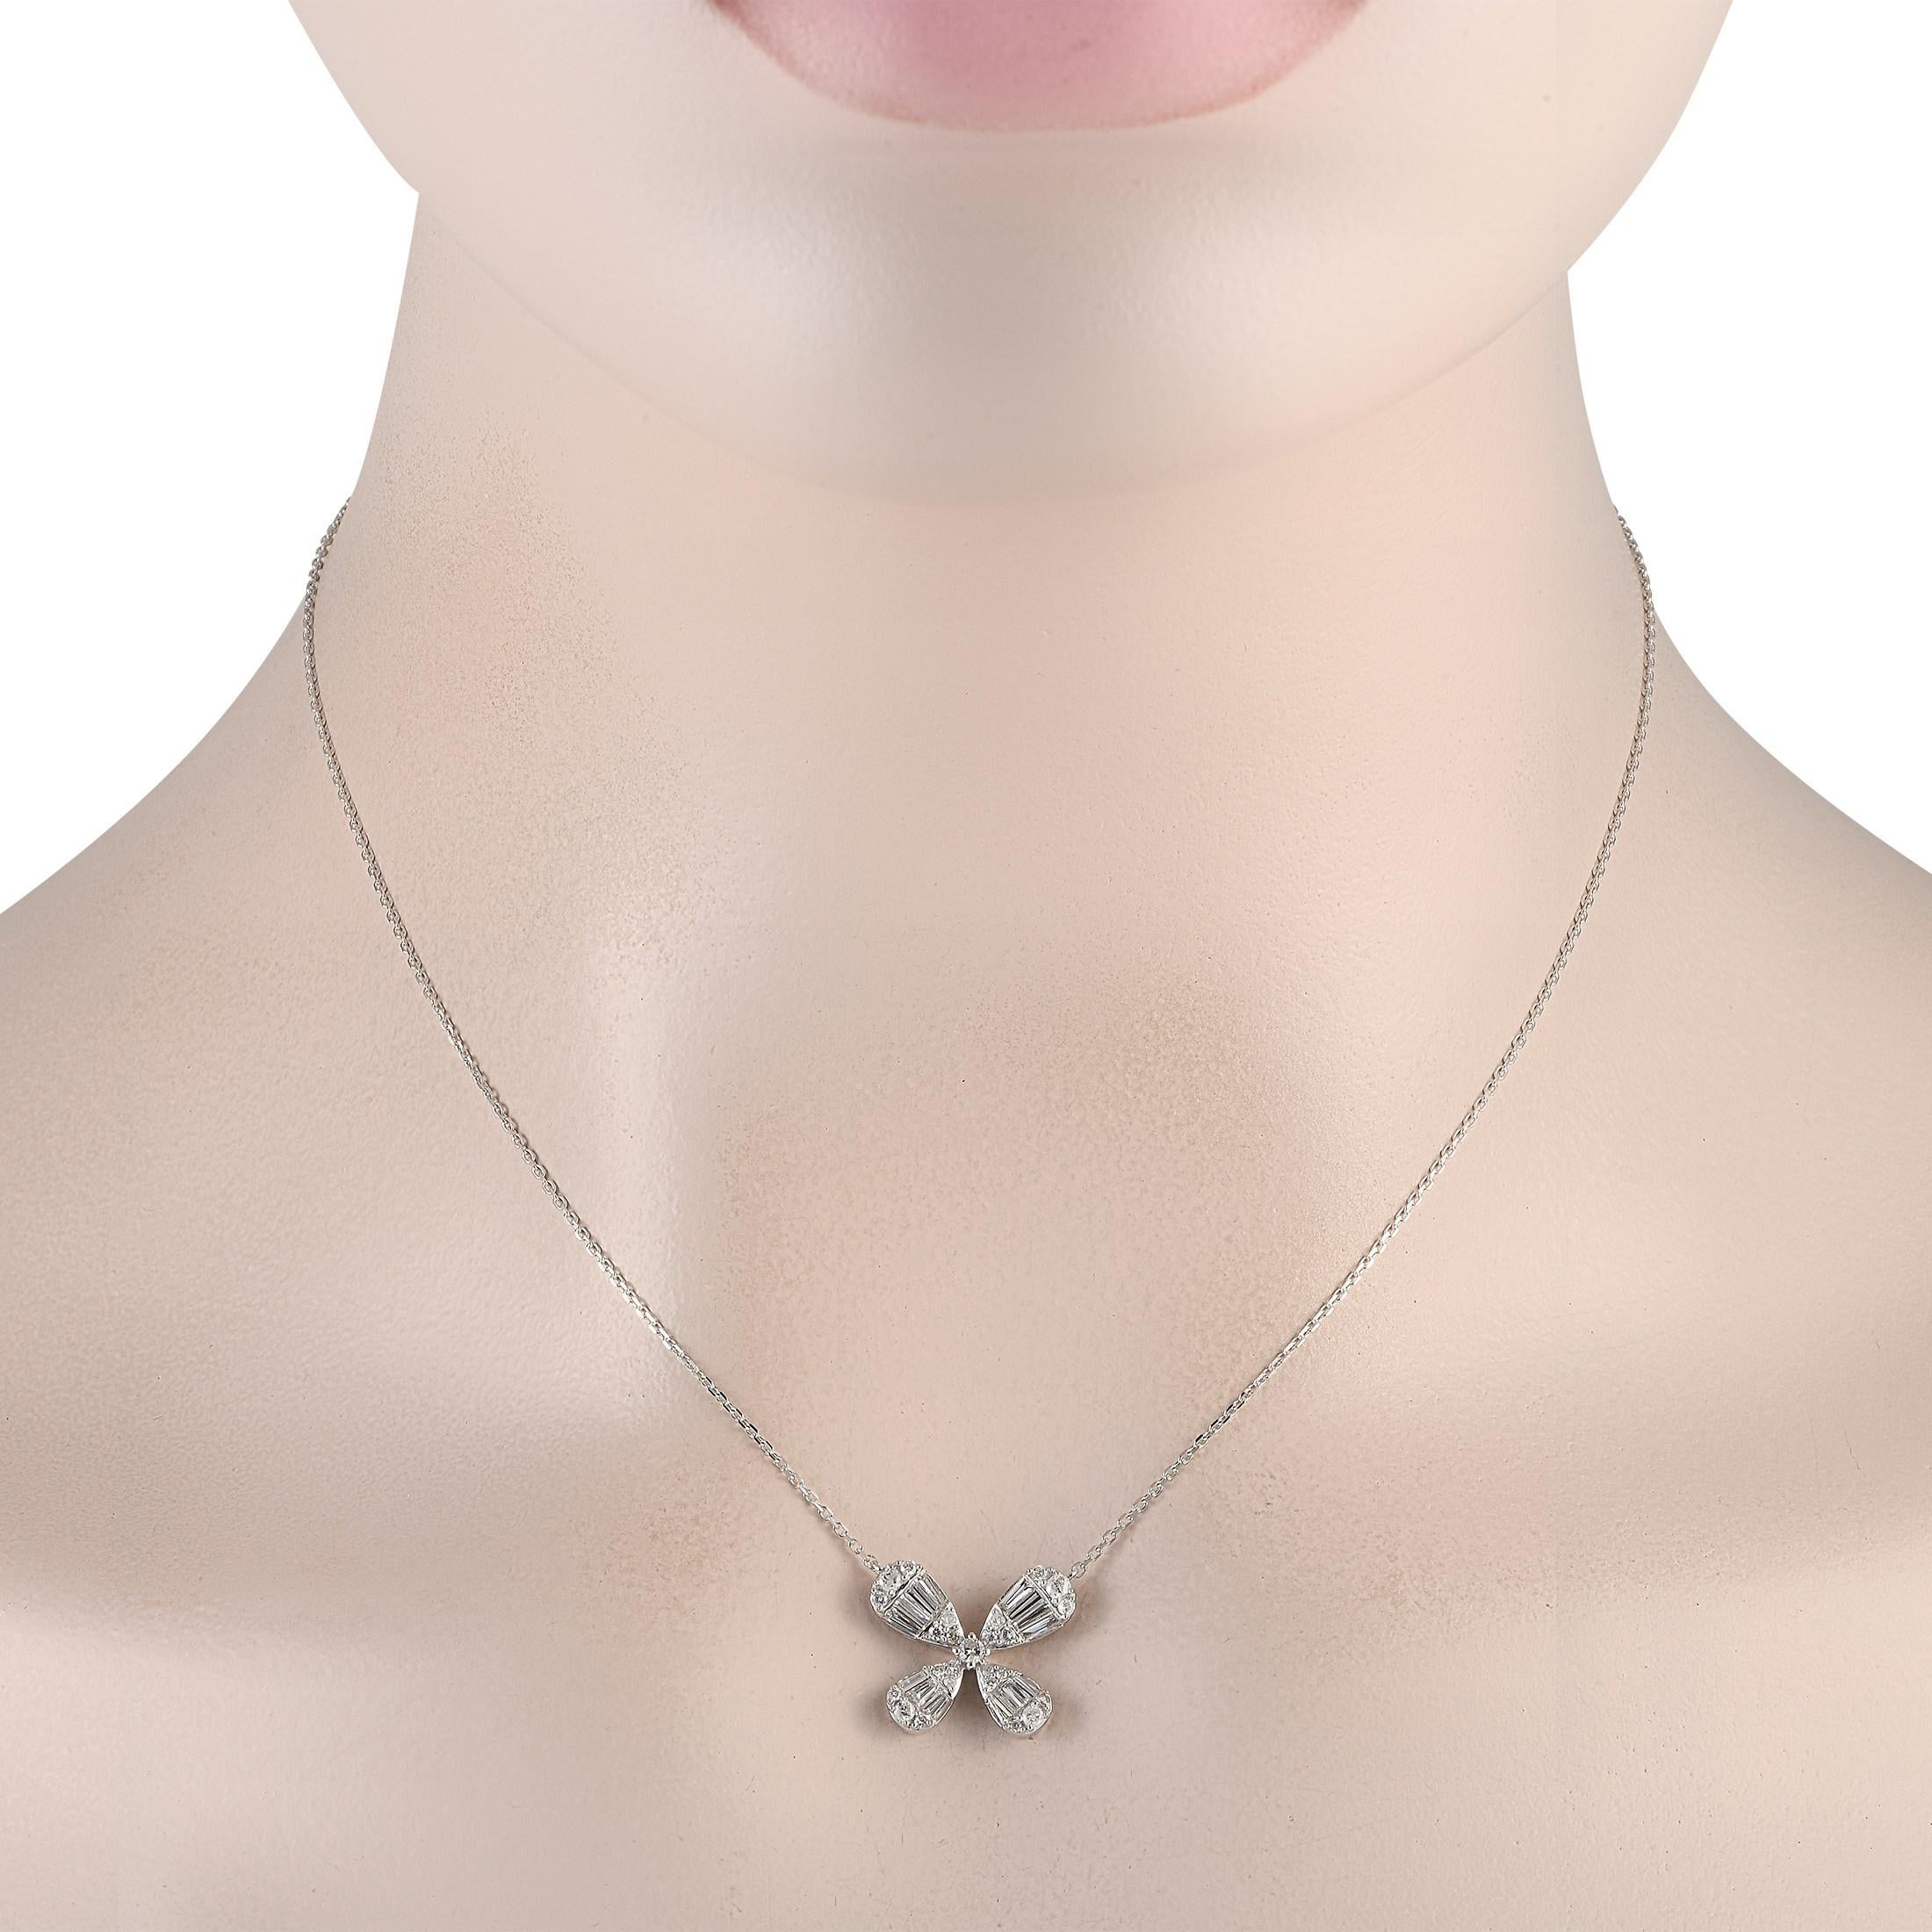 Delicate and feminine, this diamond necklace has an easy-going vibe that can instantly freshen up any look. It features a 16 chain in 14K white gold holding a flower-inspired pendant with four pear-shaped petals. A combination of round and tapered